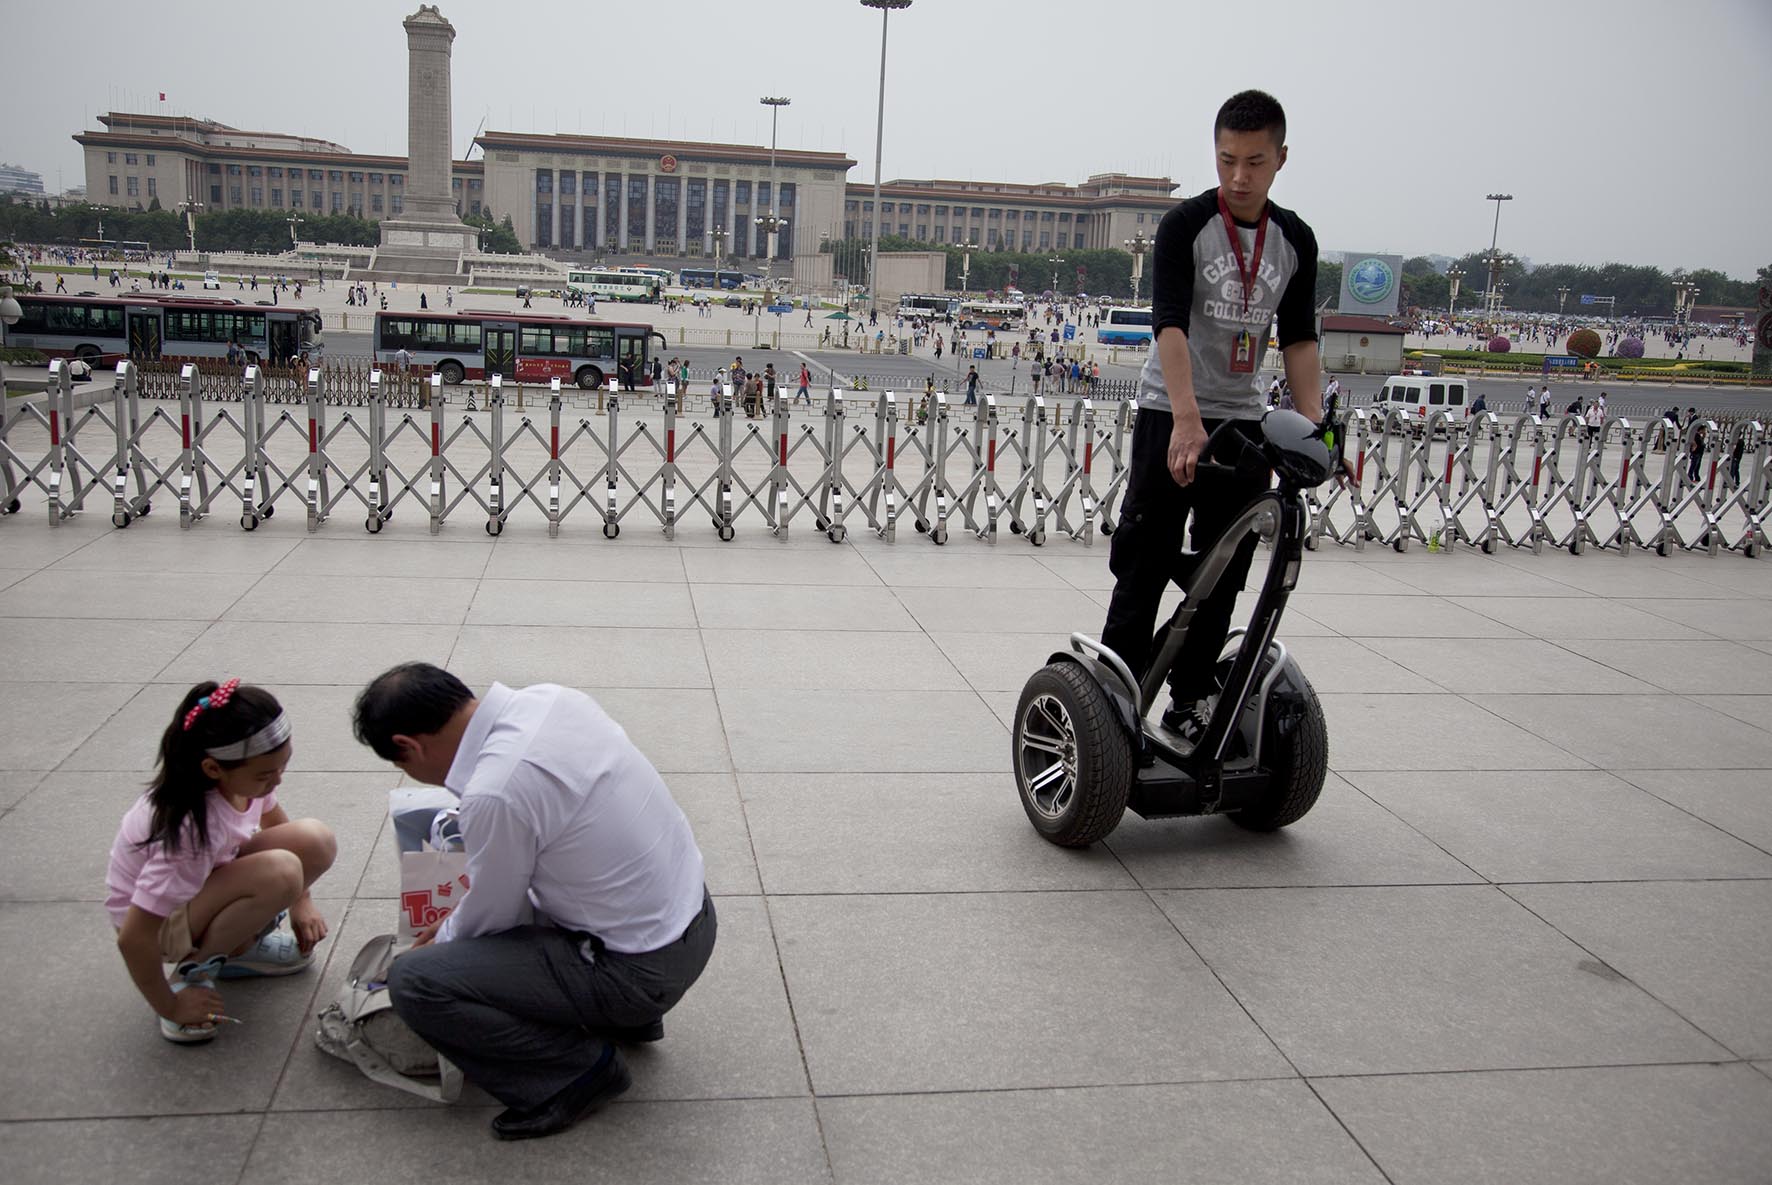  Man policing the public on a Segway two wheeled vehicle outside The National Museum of China. 